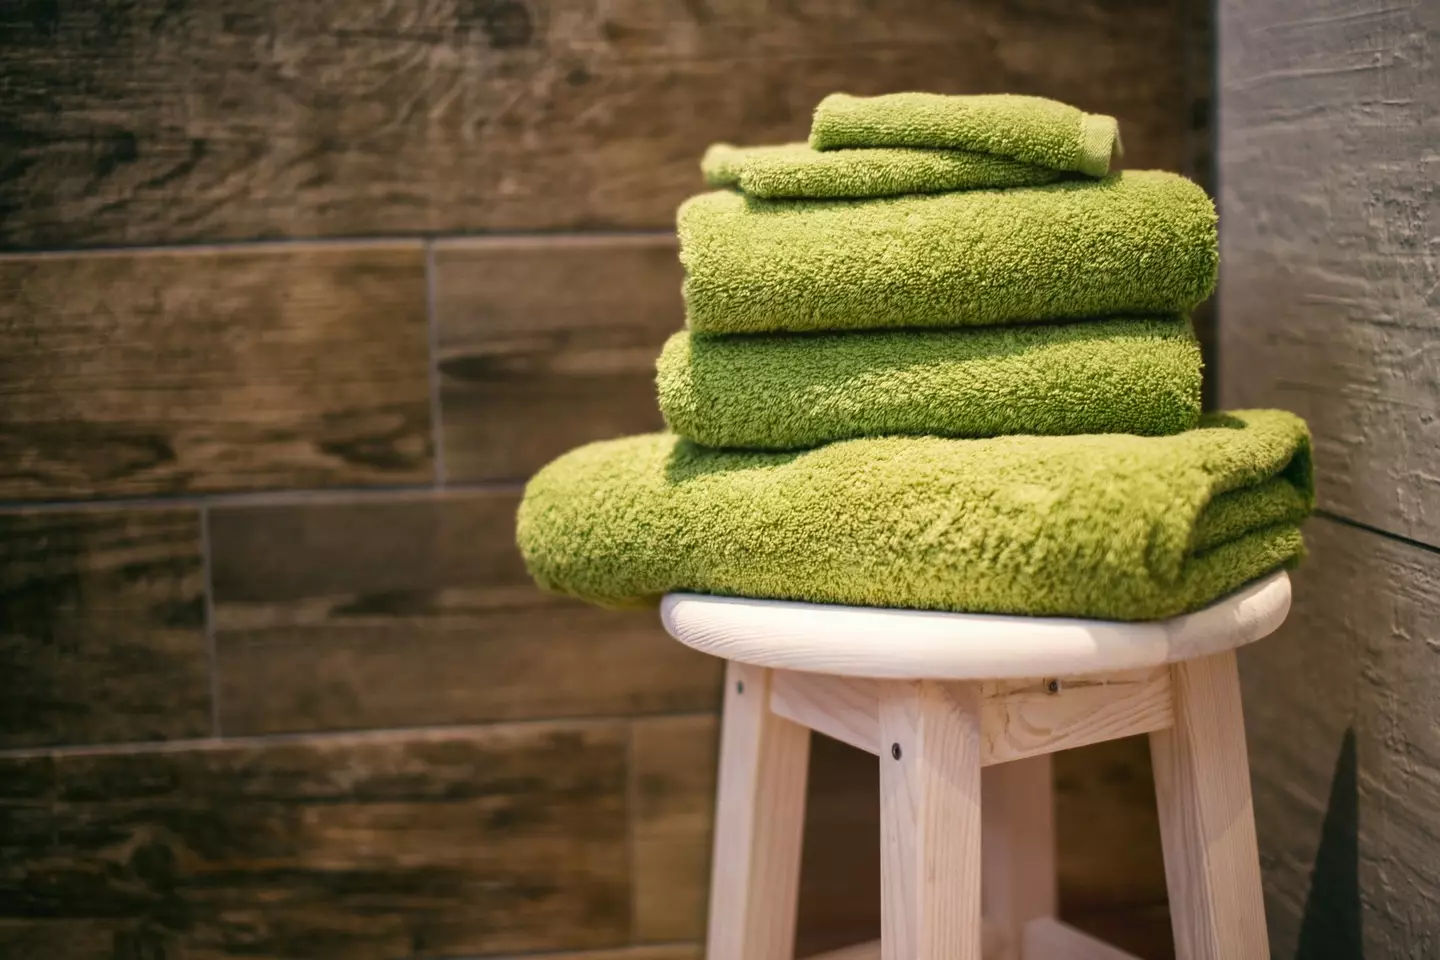 The guidance is to wash your towel after every three uses.